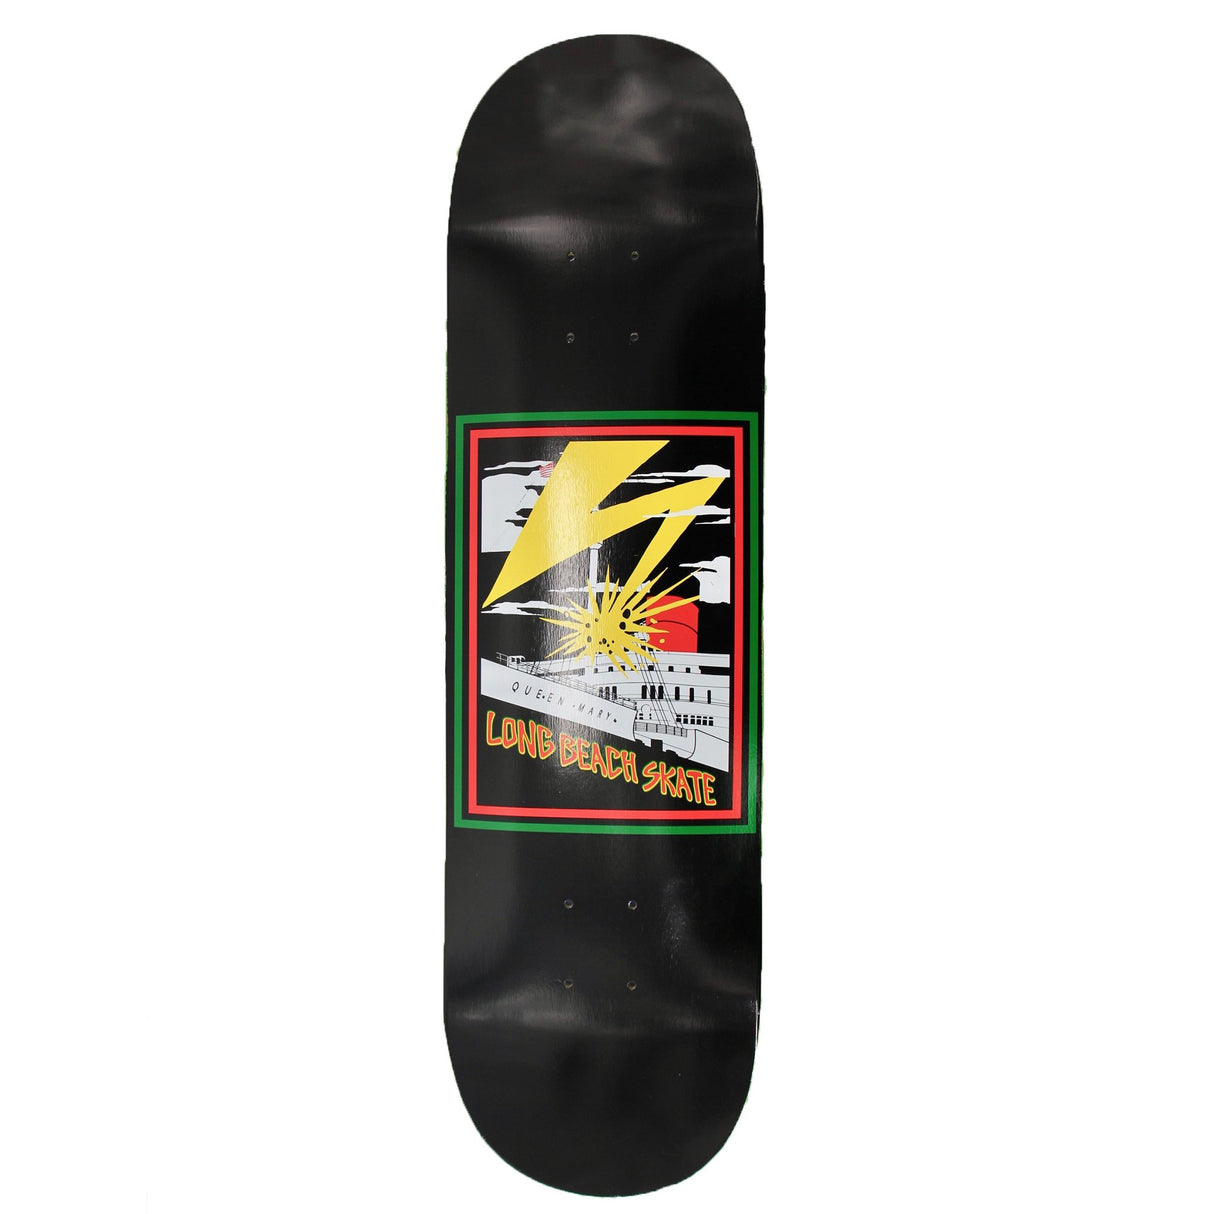 Long Beach Skate Co. Bad Queen Mary Black Red Yellow Green 7.75" Skateboard Deck